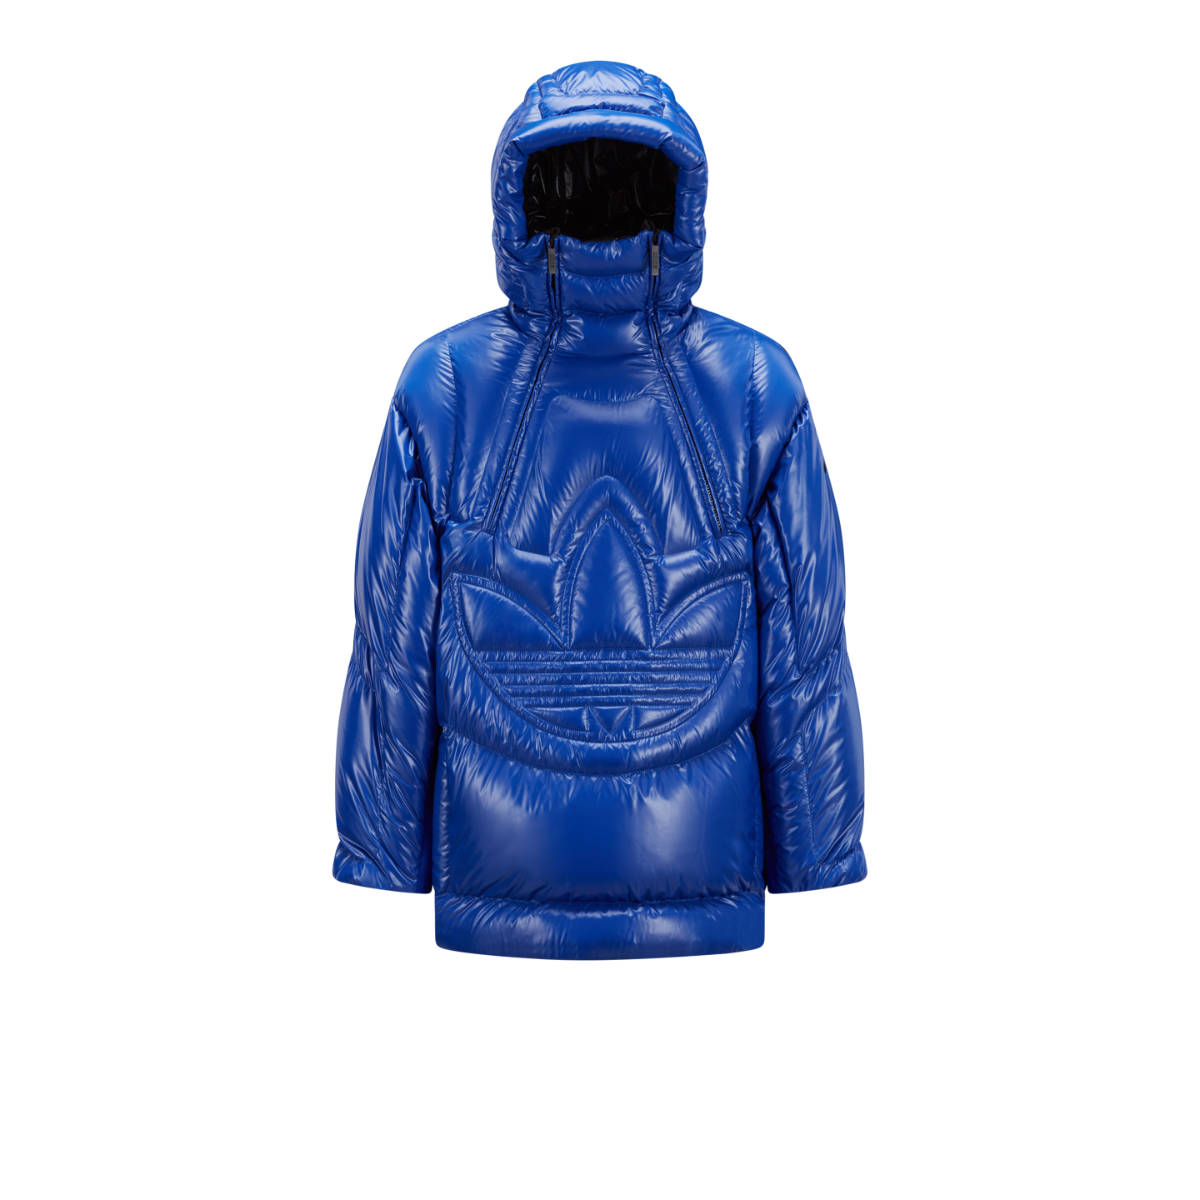 Moncler And Adidas Originals’ New Collection